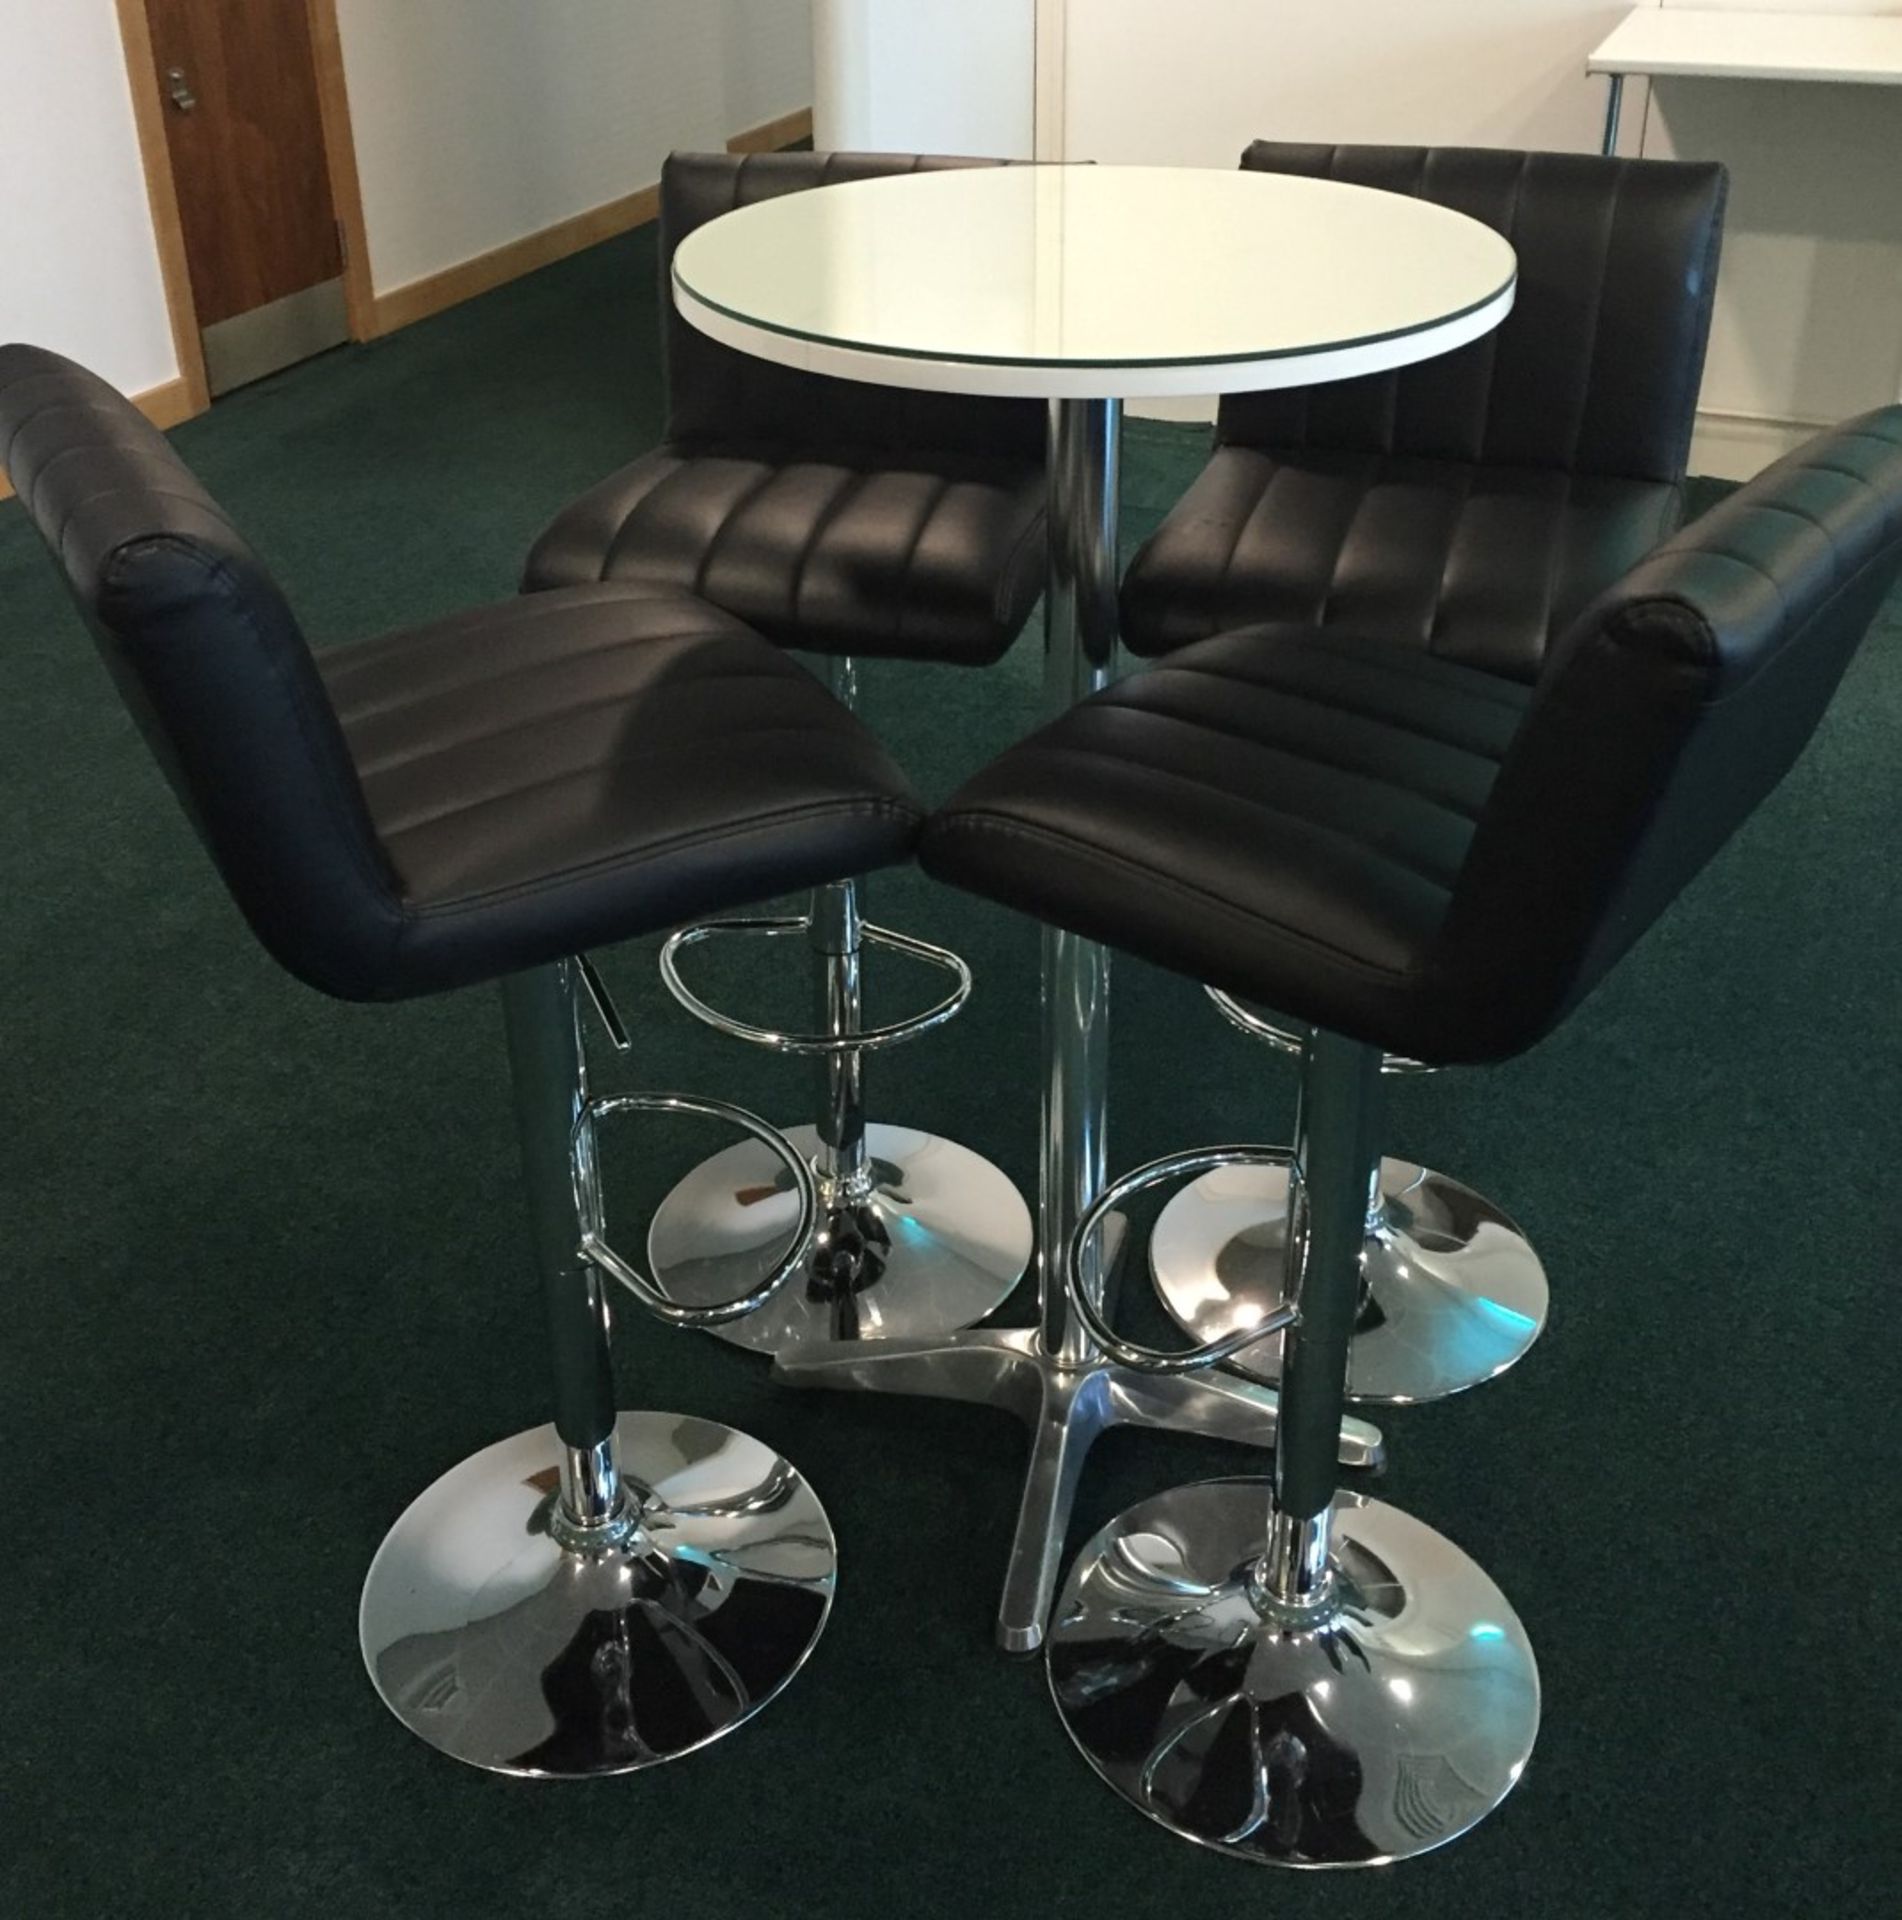 1 x Modern Canteen Coffee Table Featuring a Thick Oval Glass Surface and Cross Feet Chrome Base - - Image 2 of 13